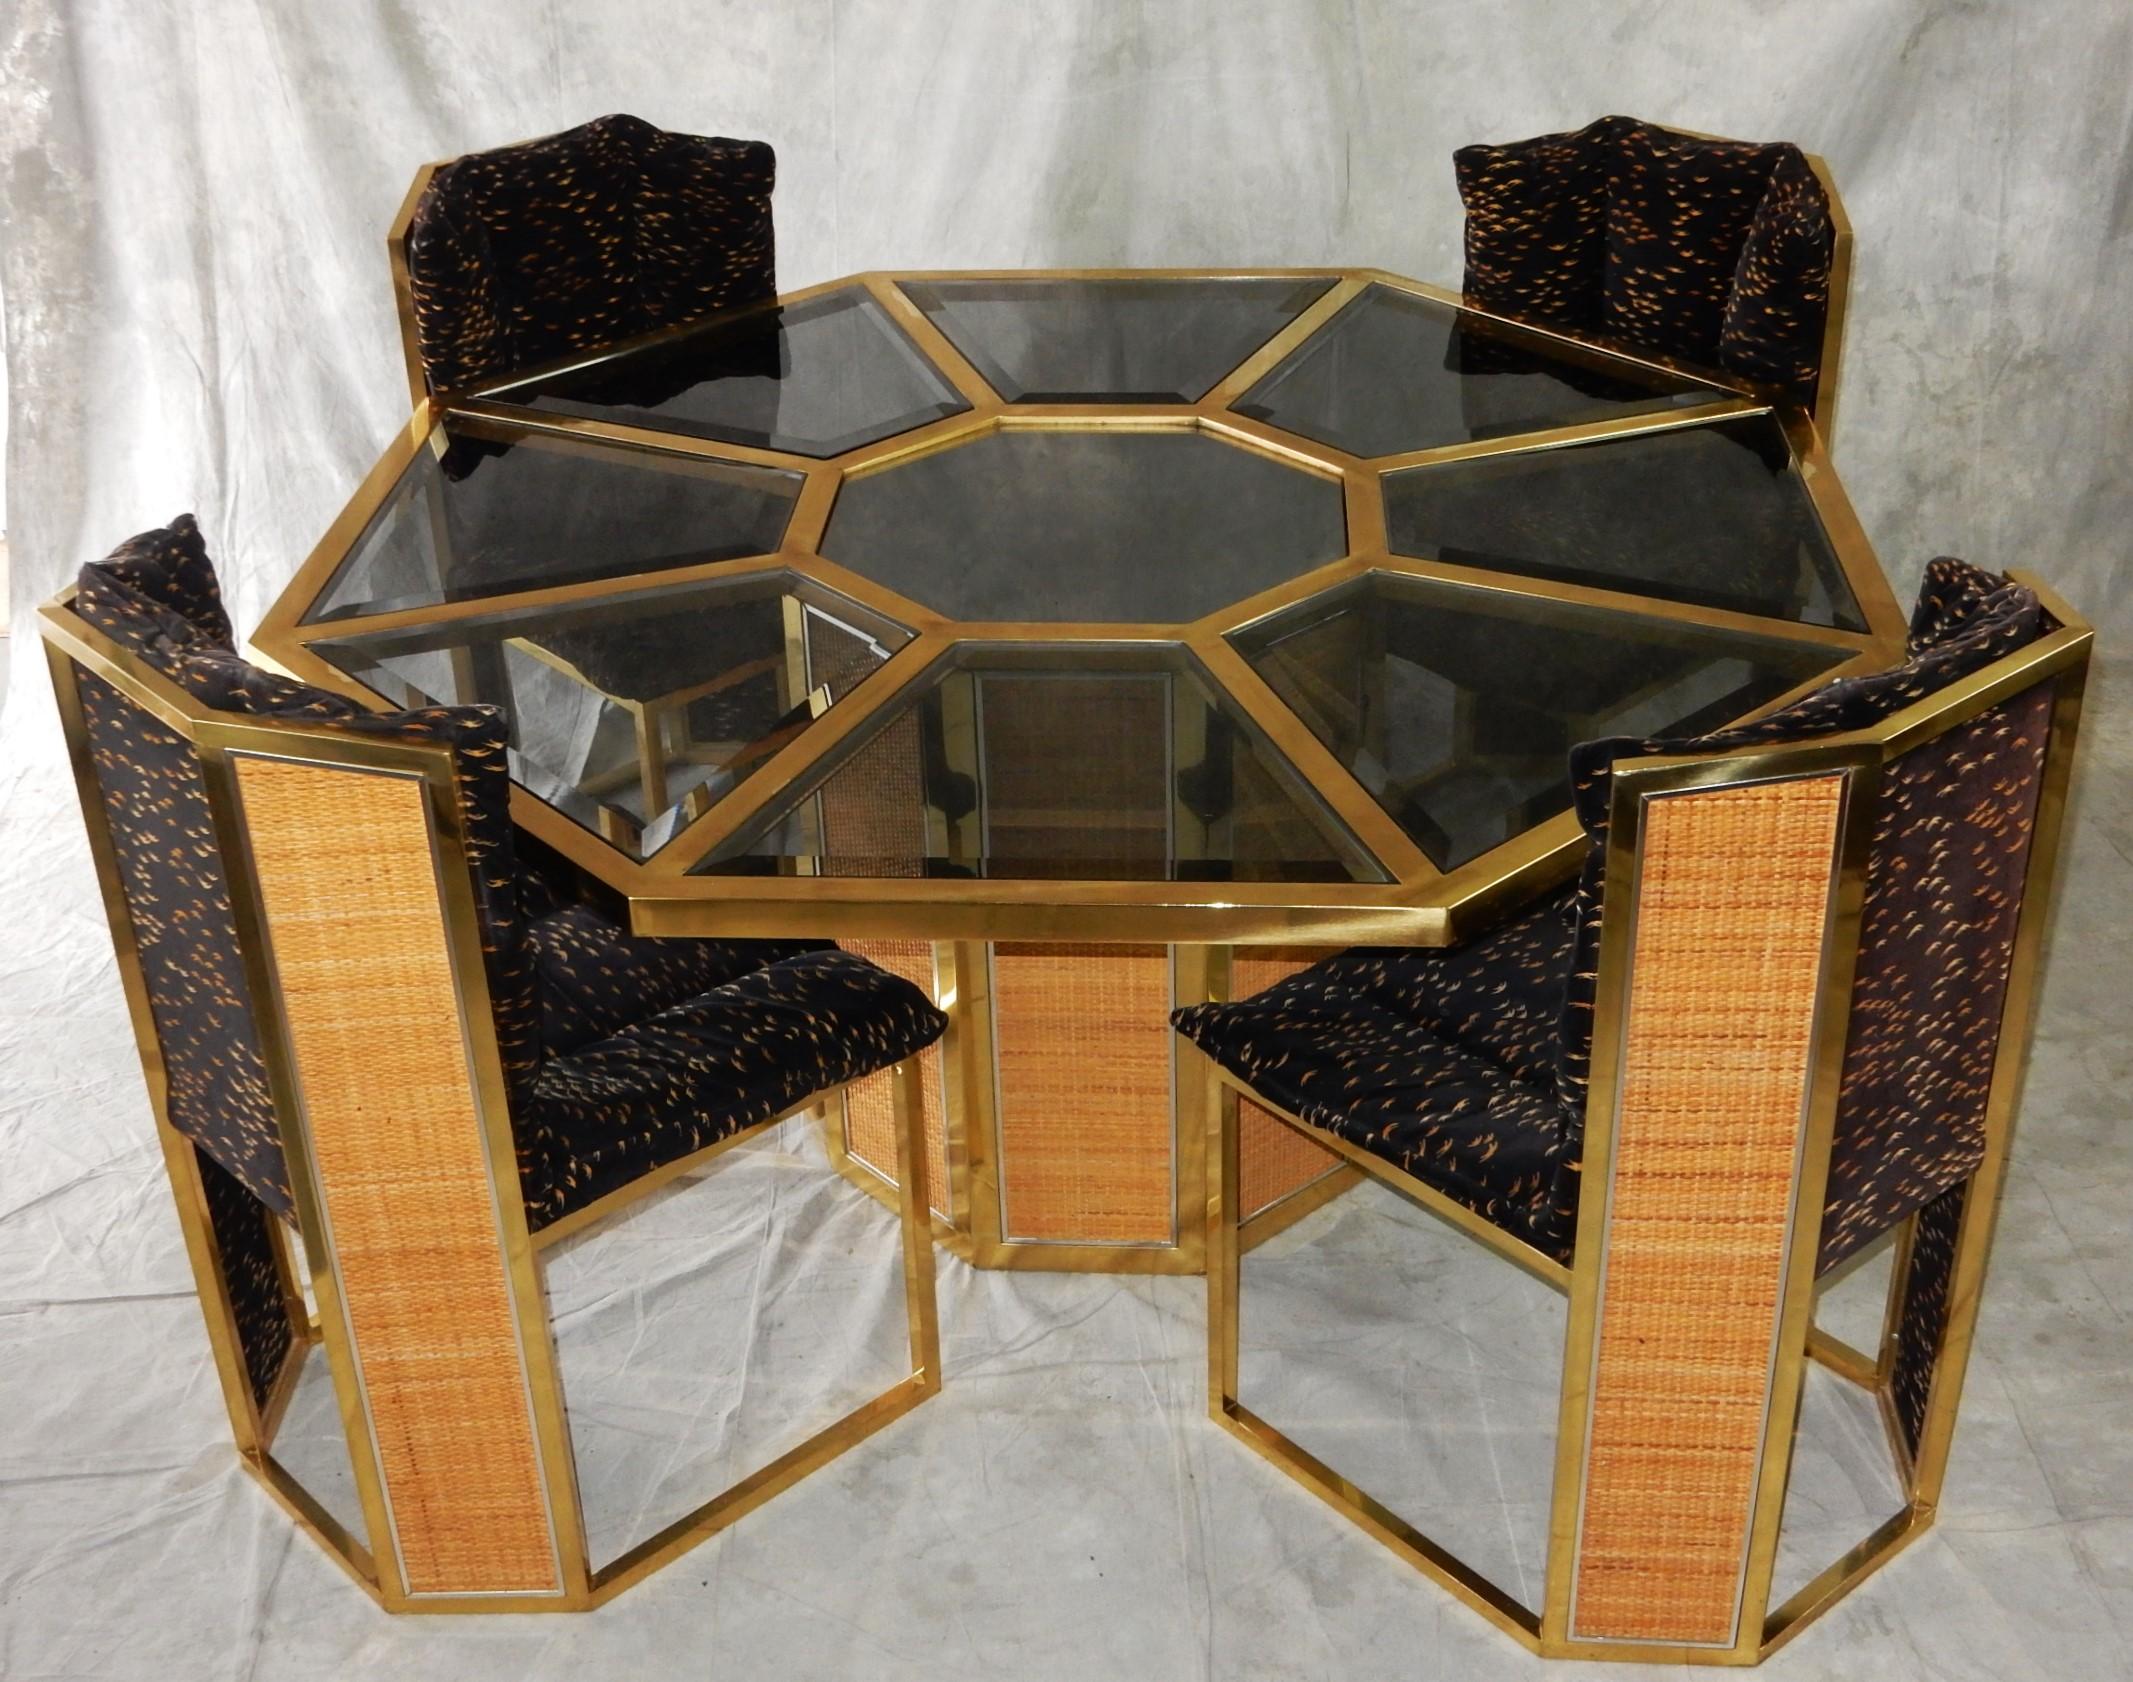 Circa 1970's Romeo Rega design for Mario Sabot dining table and 4 chairs.
Lovely combination of brass, smoke glass and wicker trimmed in chrome make this set a standout in any decorum. Crafted in Italy.
The table and chairs have been deep cleaned